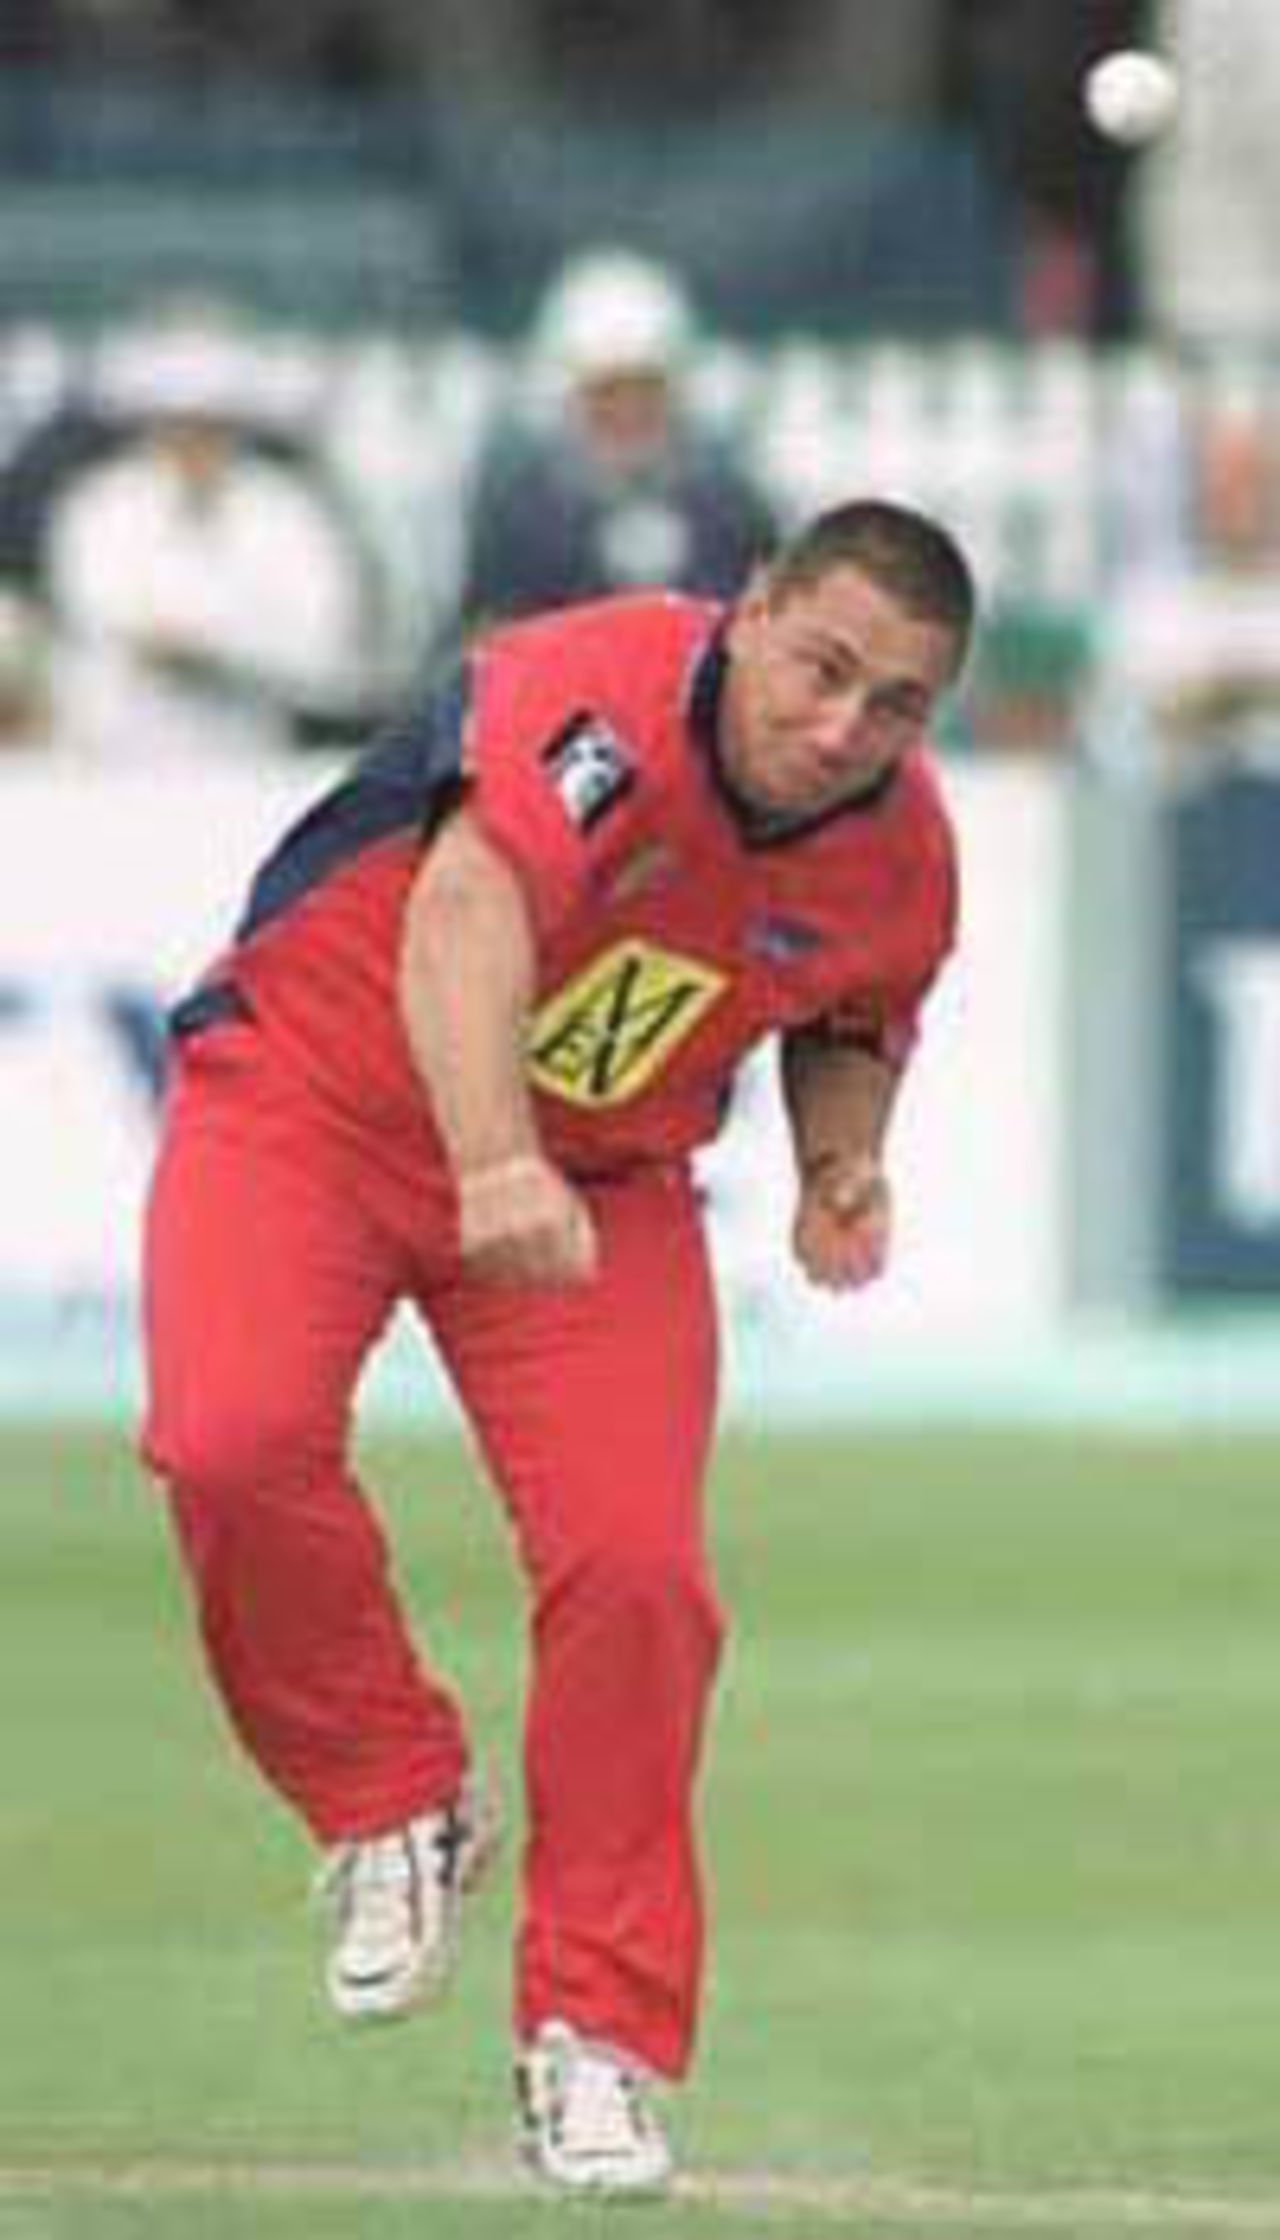 Ian Austin in action against Sussex at Brighton, National League Division One, 2000, Sussex v Lancashire, New County Ground, Hove, Brighton, 07 August 2000.